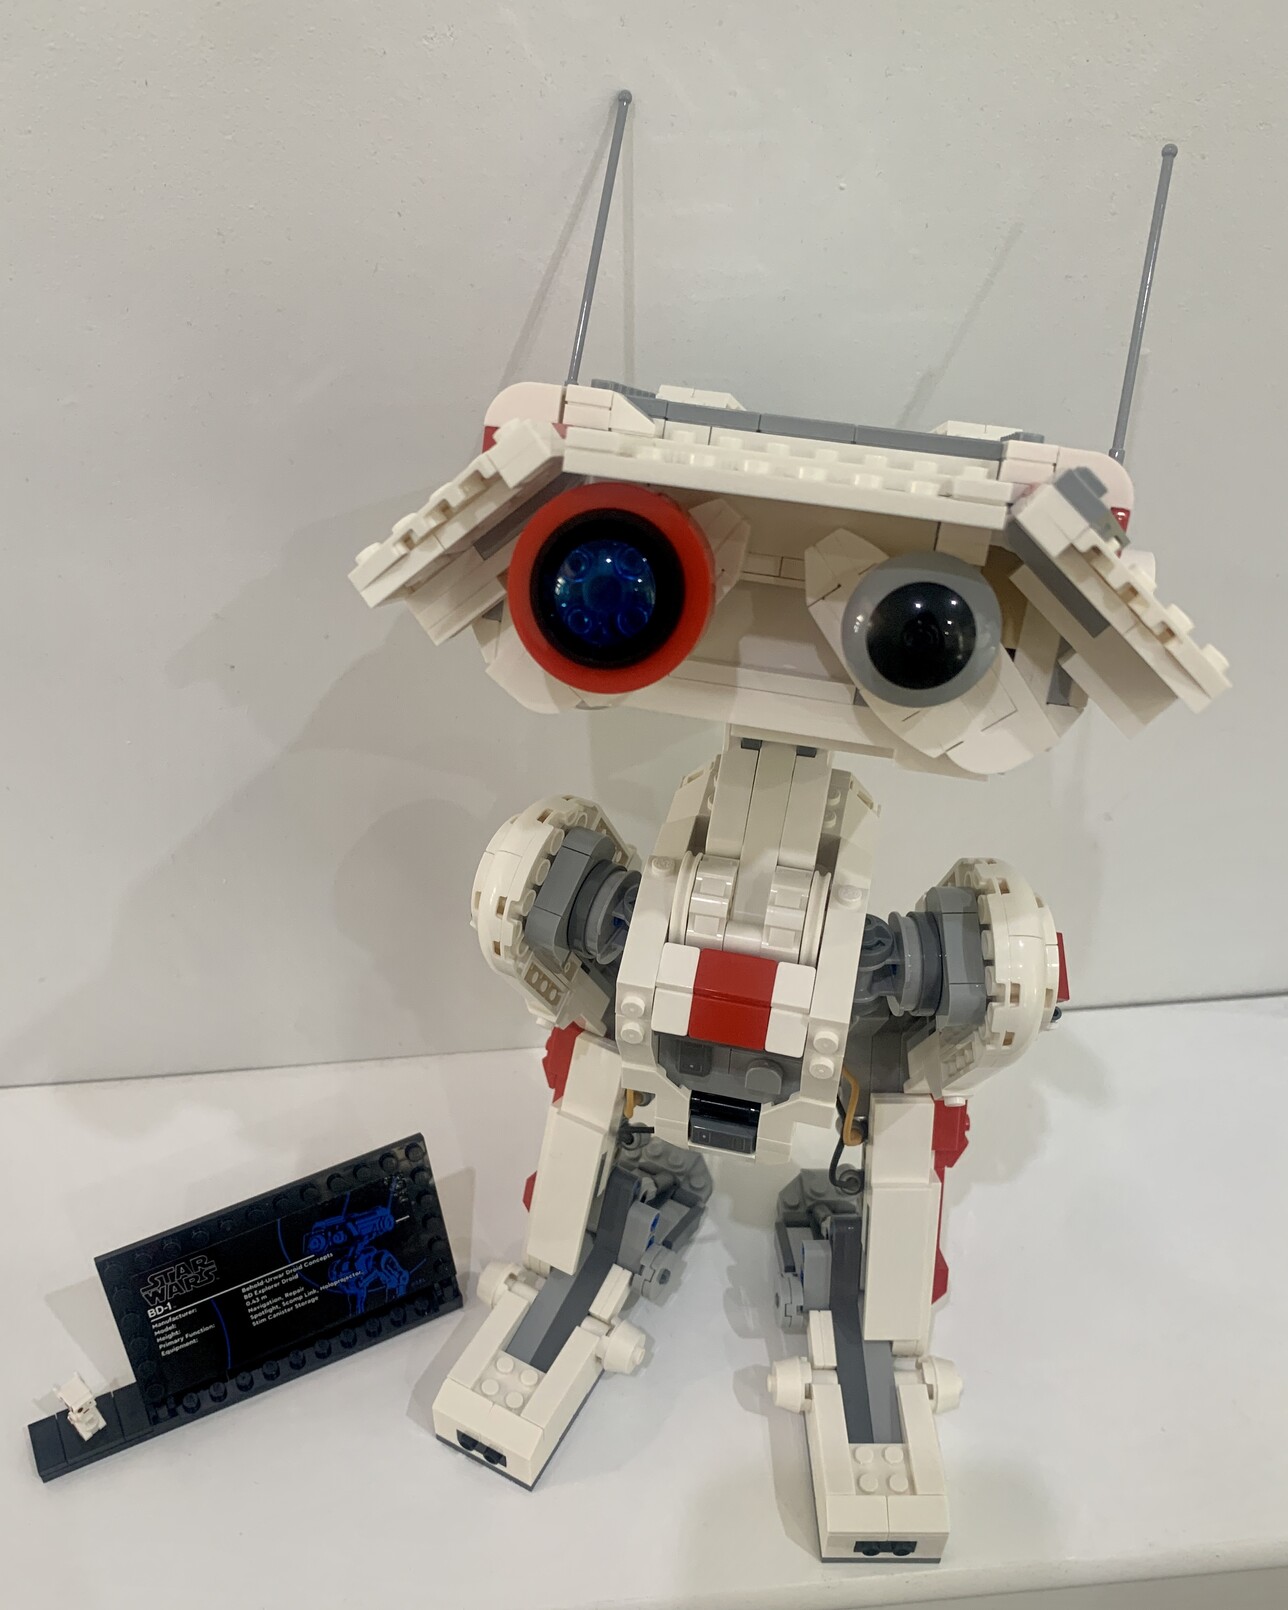 Lego BD-1. A short bipedal white, red and grey robot with an oversized head. The heads left â€œeyeâ€� is red while the right â€œeyeâ€� is grey. He has 2 antennas coming out each side of his head. His head is tiled up towards the camera